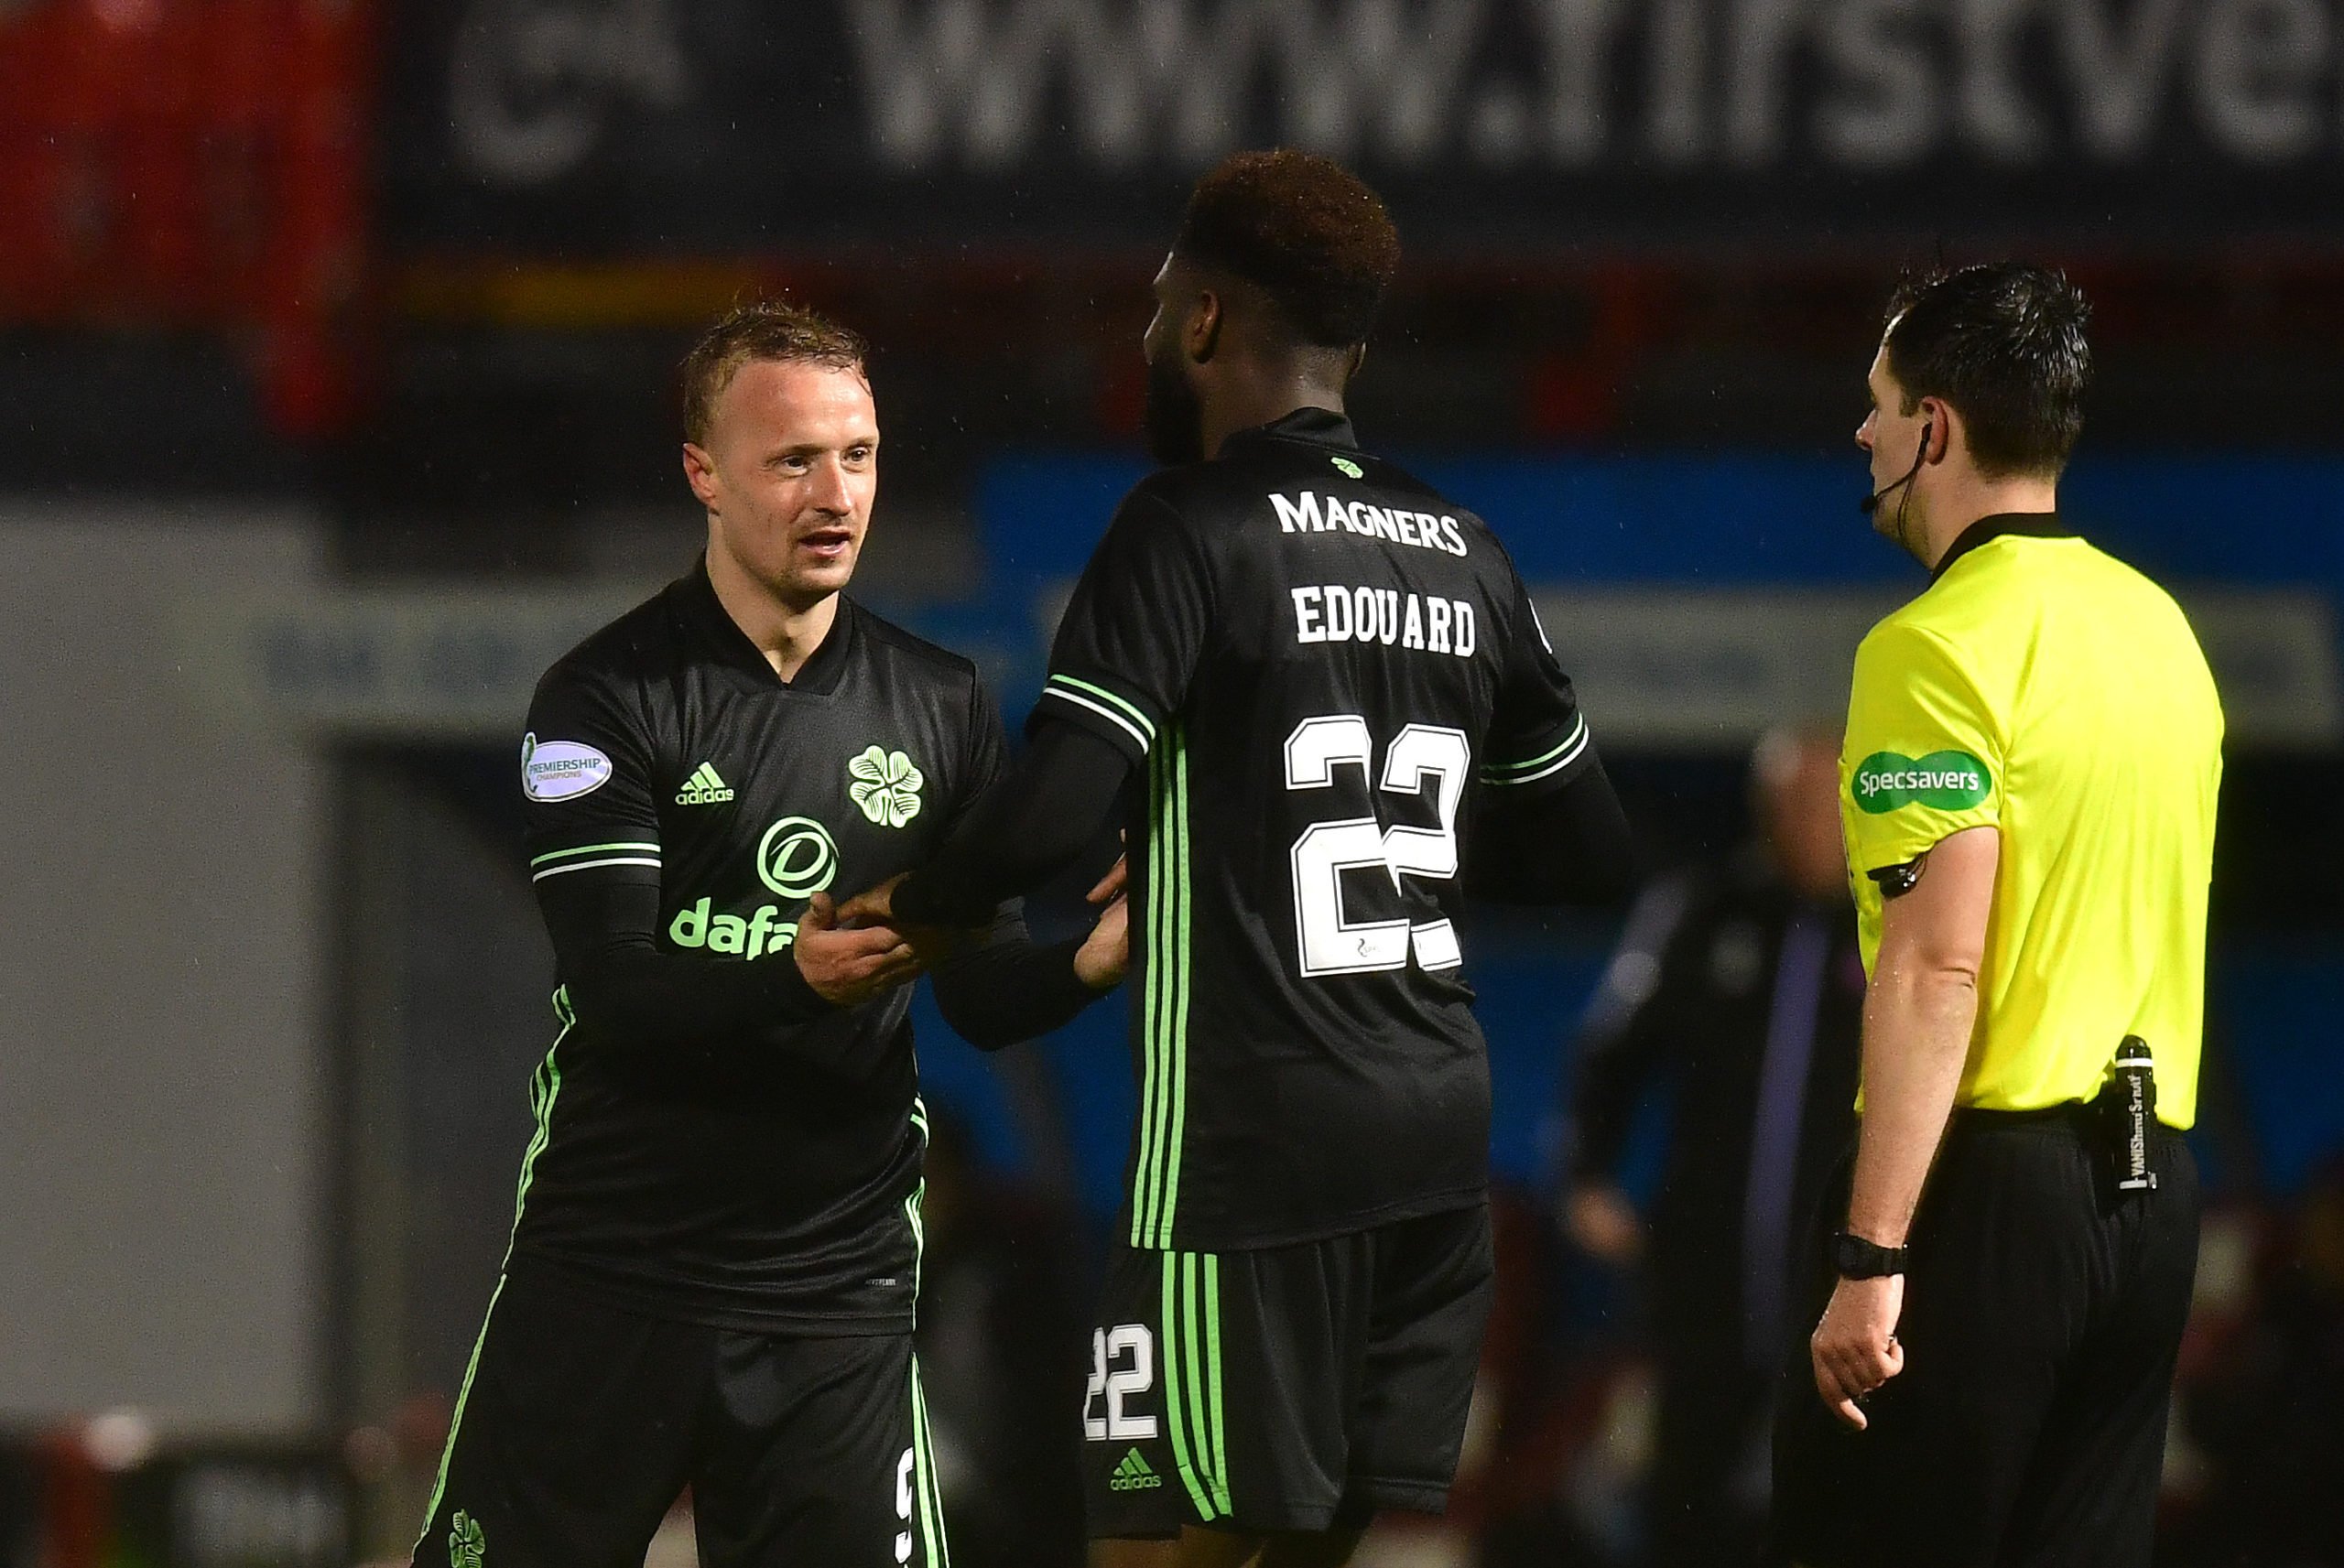 Griffiths and Edouard delight Celtic fans with latest display; combination looking very good